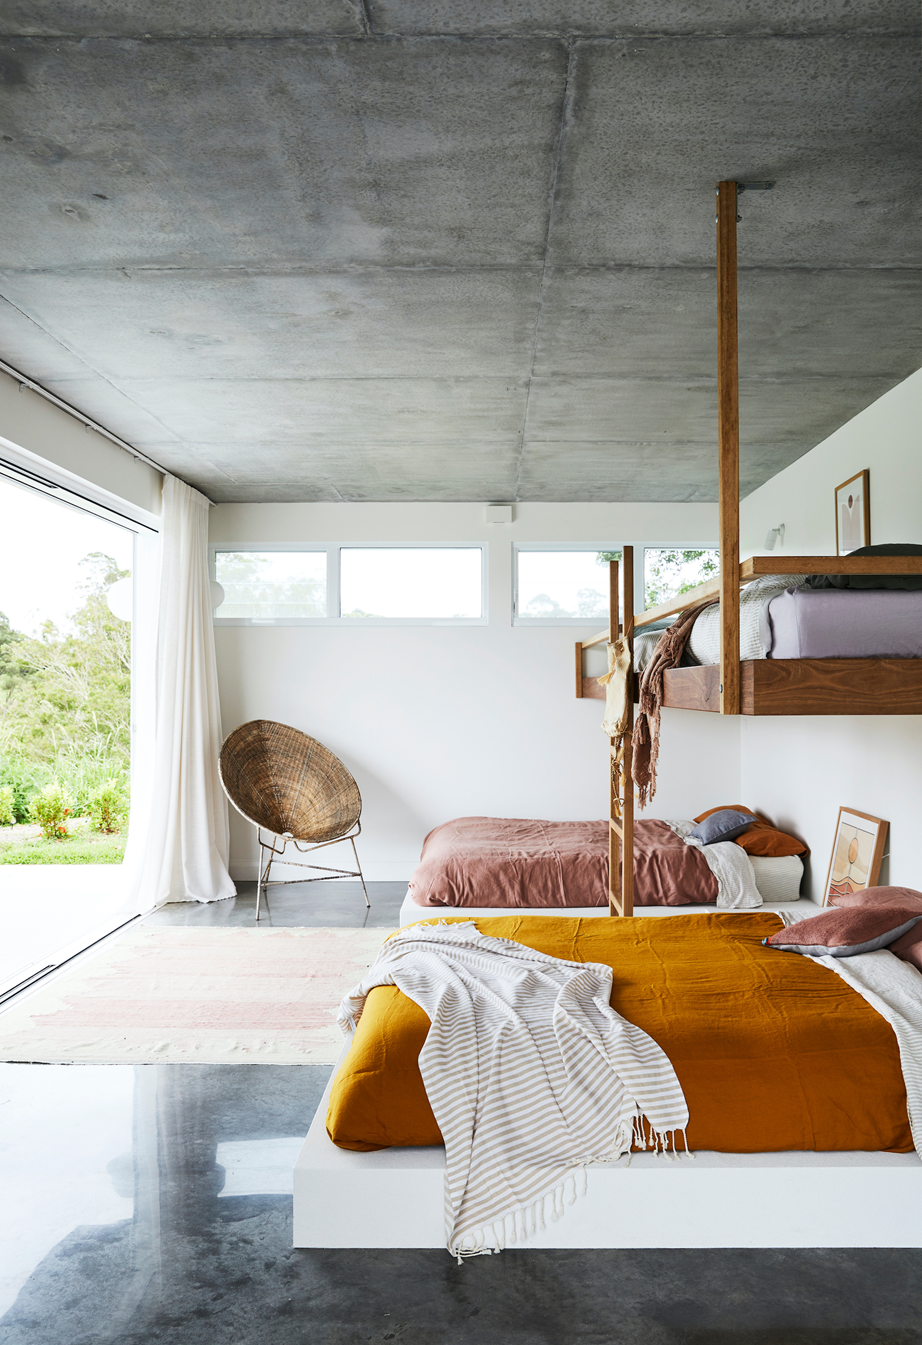 Textured linen bedding in earthy tones bring warmth to this bedroom in a sunlit [Byron Bay home](https://www.homestolove.com.au/new-build-byron-bay-hinterland-22186|target="_blank"), despite its concrete flooring and large windows.